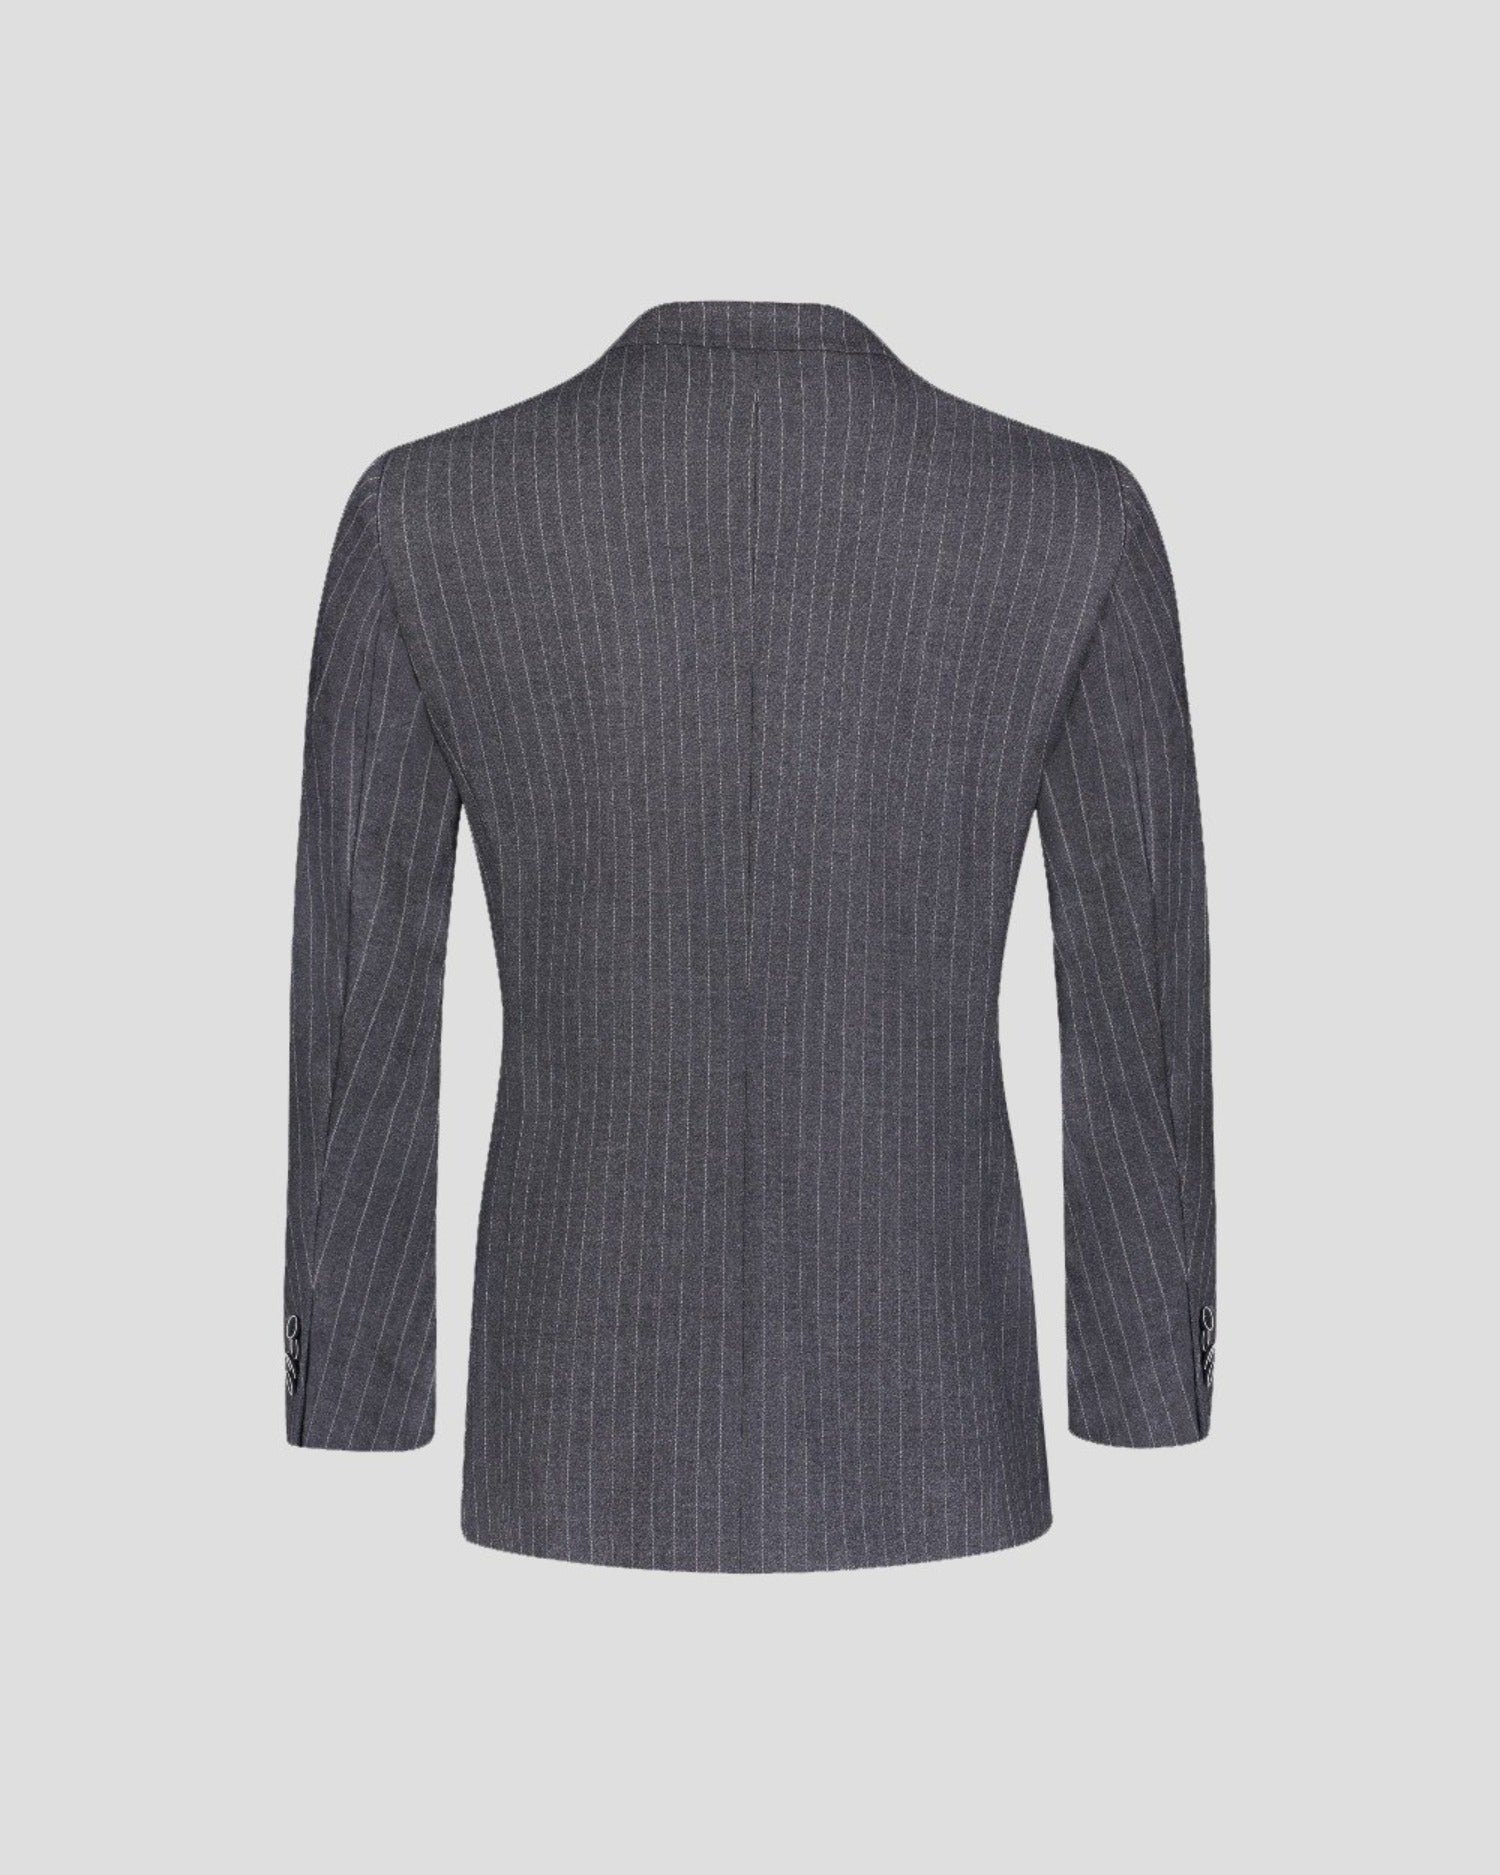 SG Double Breasted Blazer V2 – Charcoal